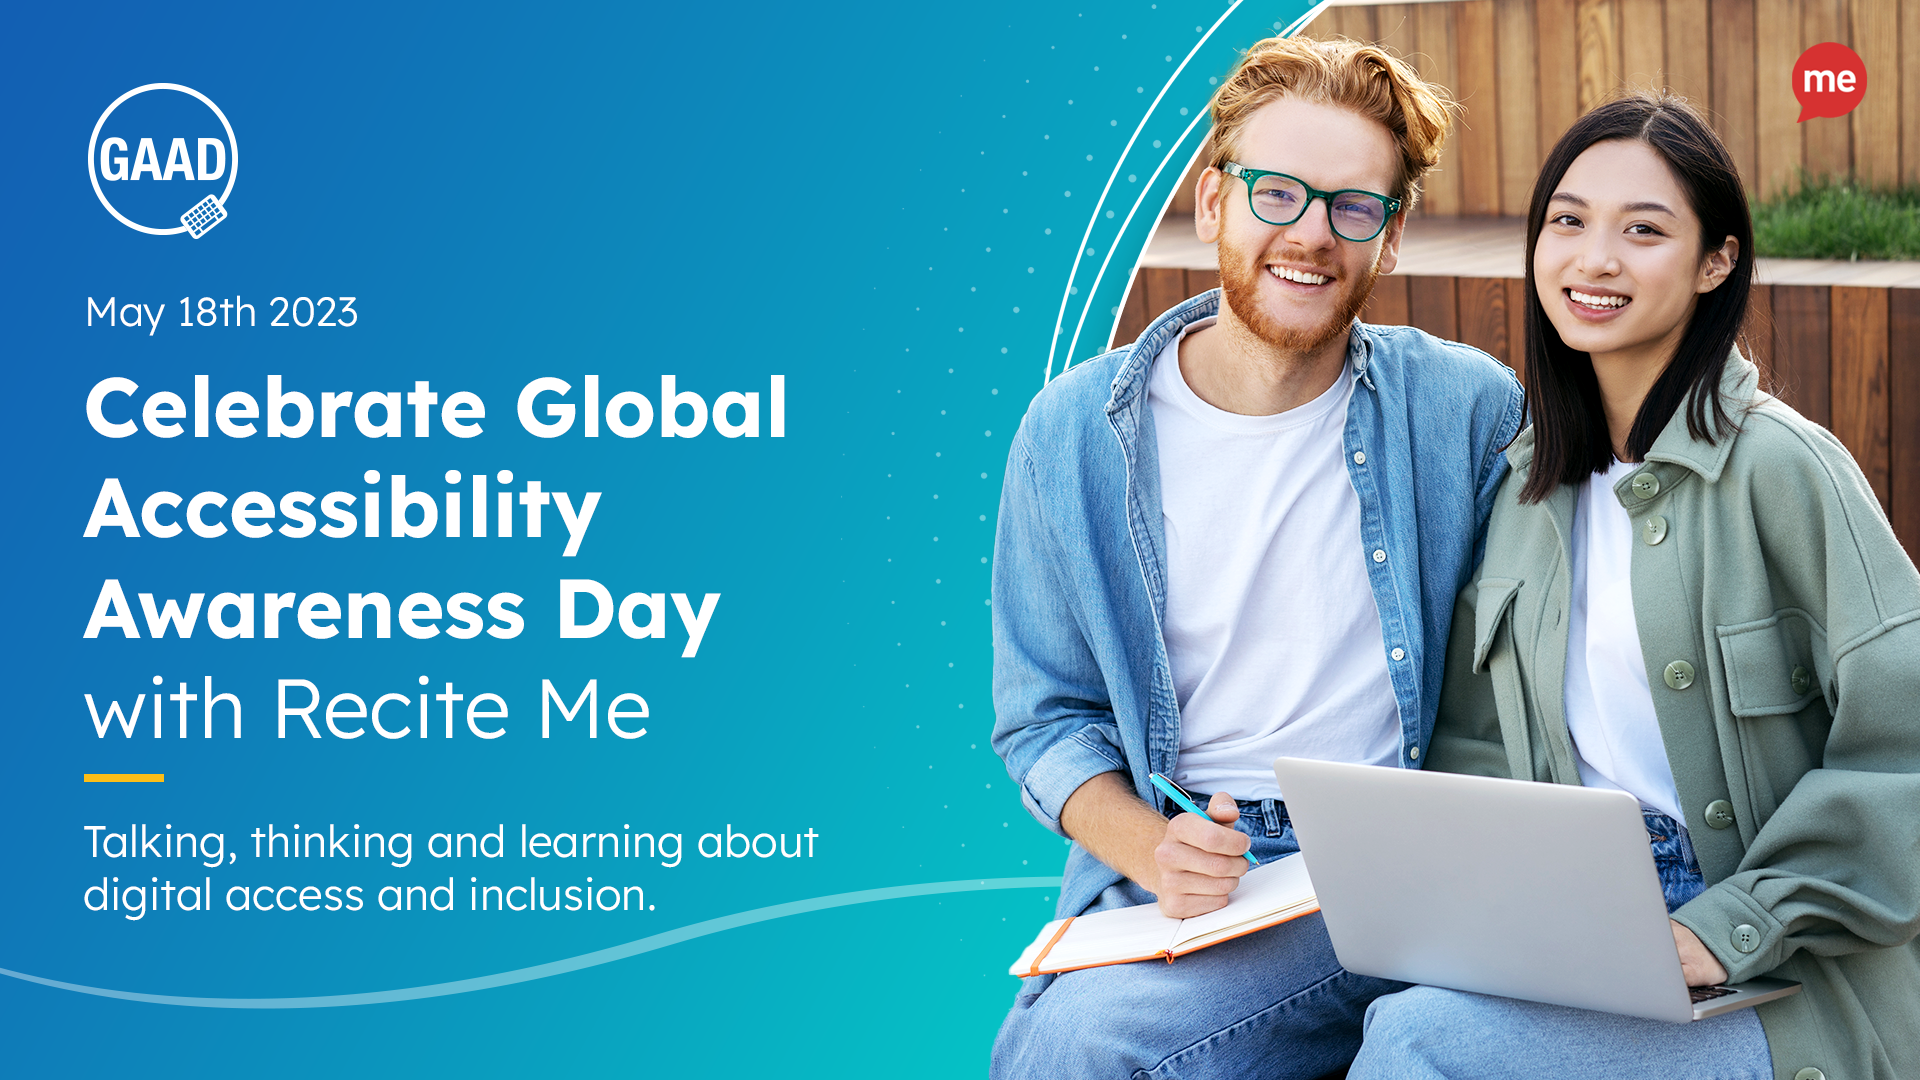 Celebrate Global Accessibility Awareness Day with Recite Me